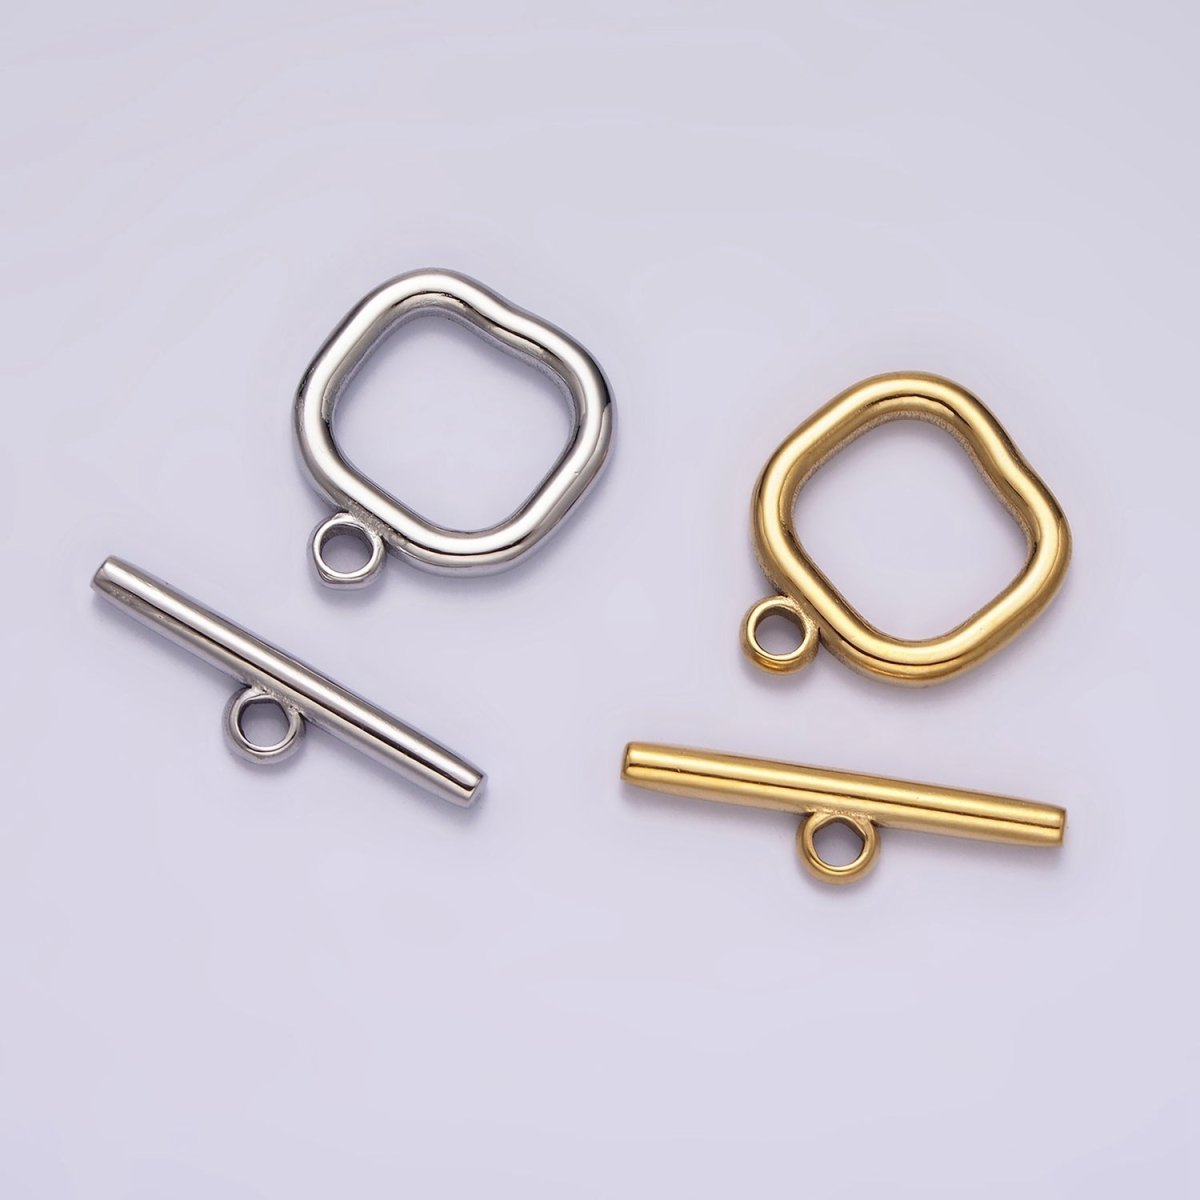 Stainless Steel Square Toggle Clasp Closure Minimalist Jewelry Findings Supply in Gold & Silver | Z589 Z590 - DLUXCA